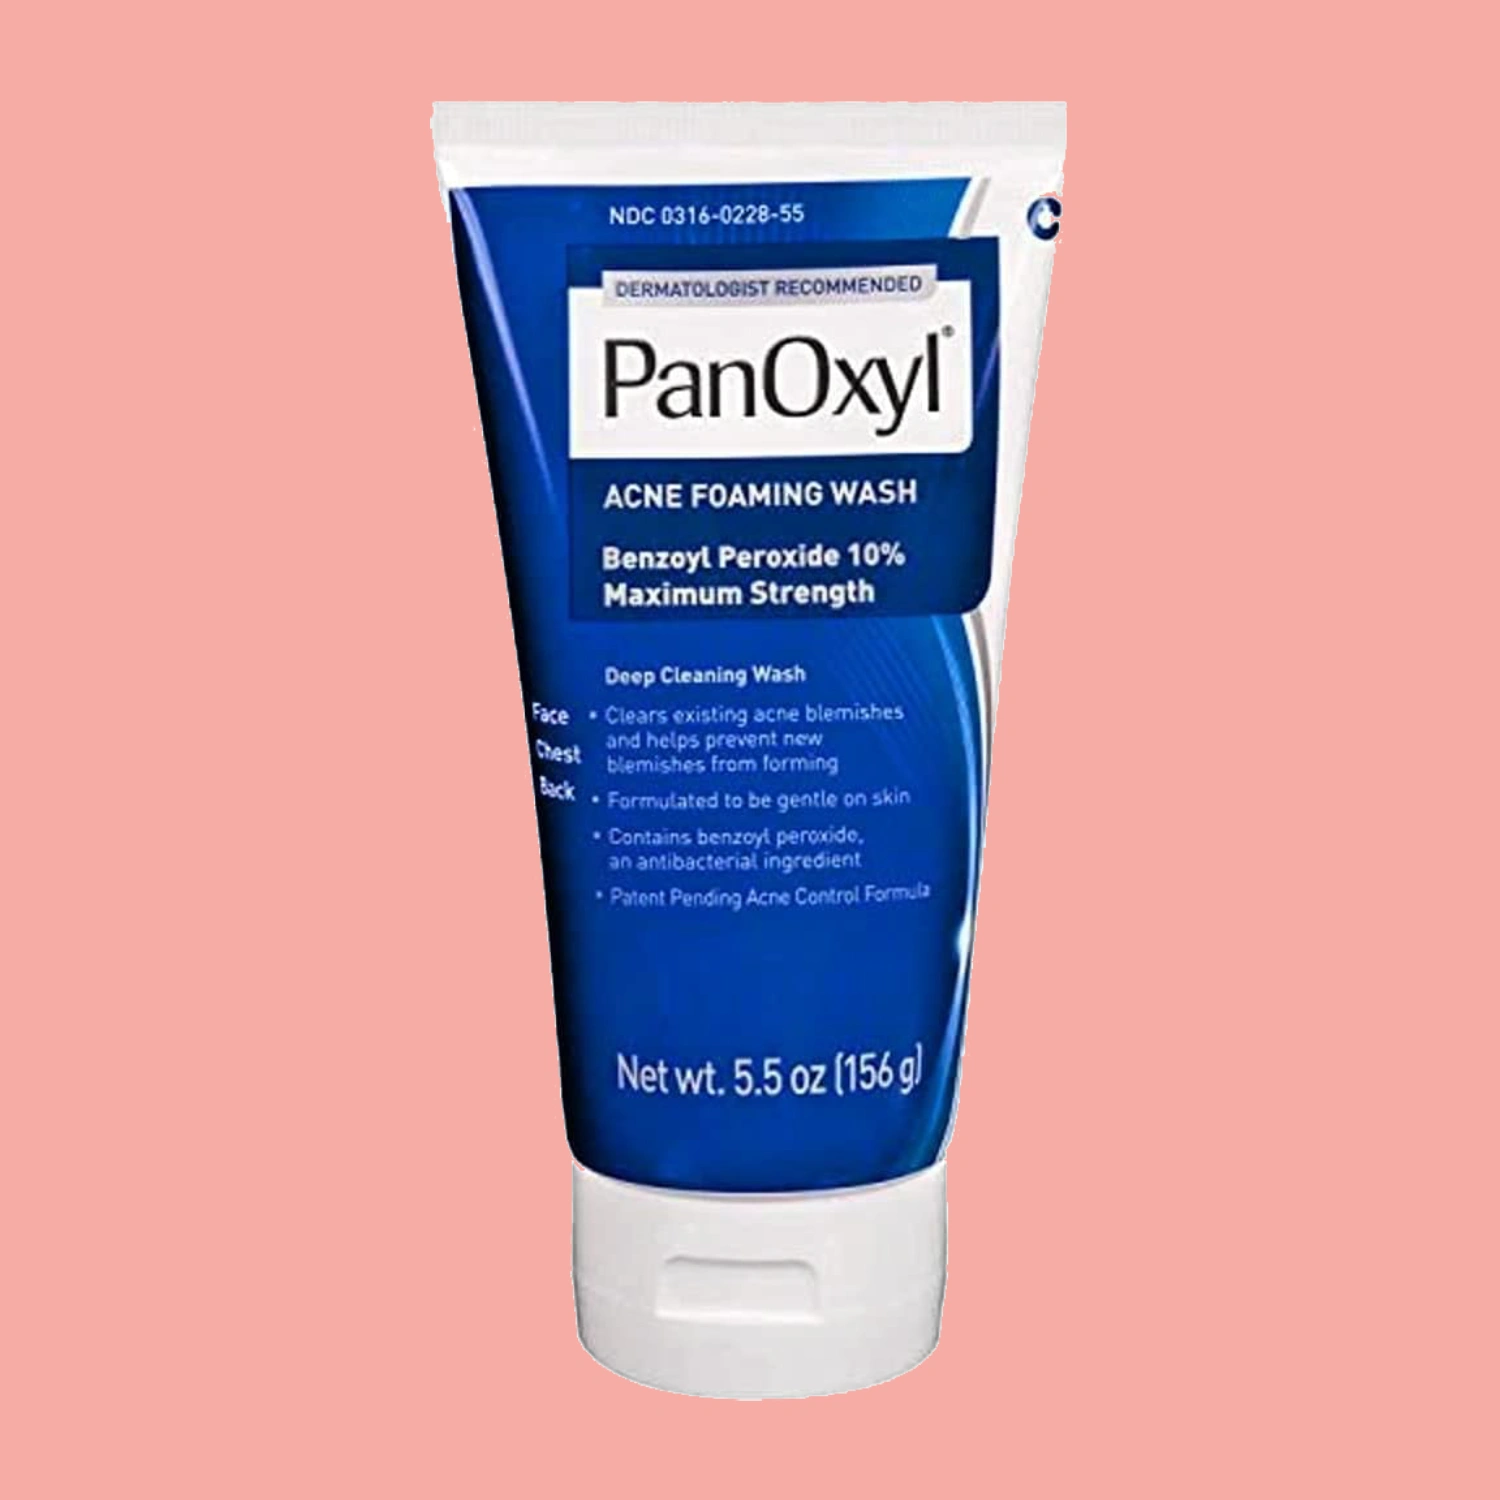 A bottle of PanOxyl Acne Foaming Wash on a neutral background